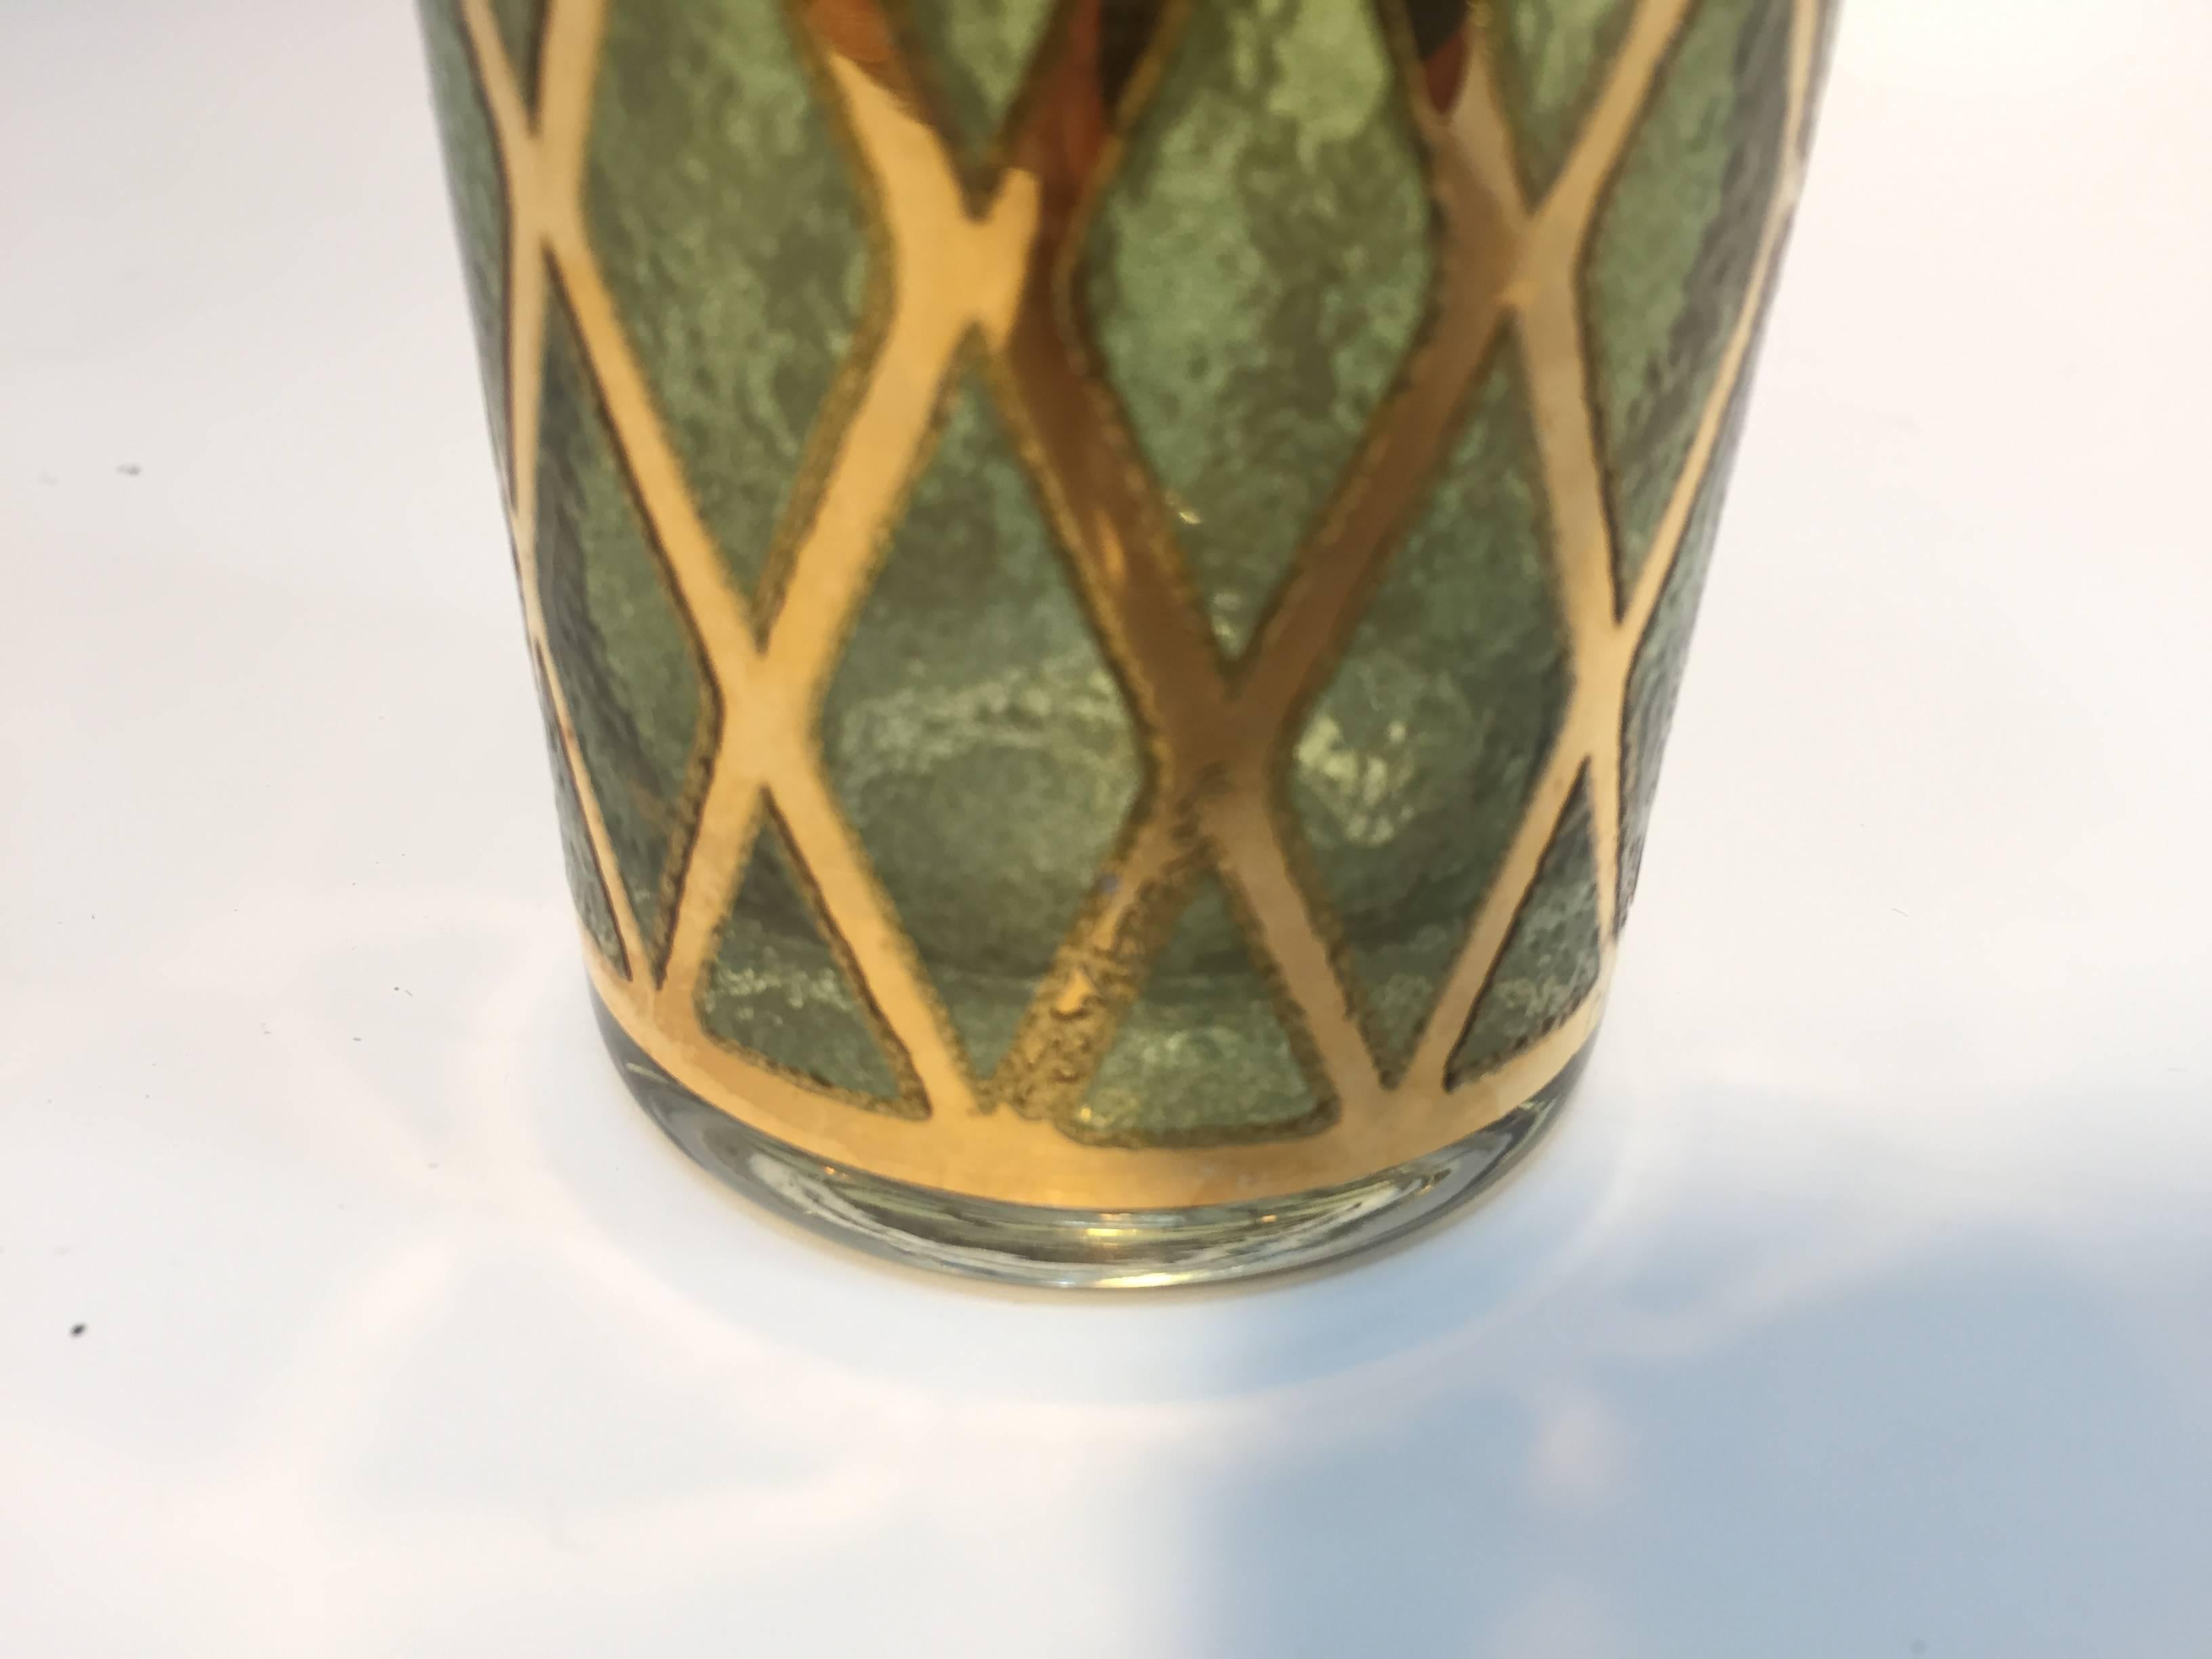 Each vintage cocktail glass is decorated with green and gold designs. 
There are four glasses in the set. 
The gold design and lozenges decorations are in mint condition.
By Culver Ltd, nice to add to any barware cocktail collection,
circa 1960.